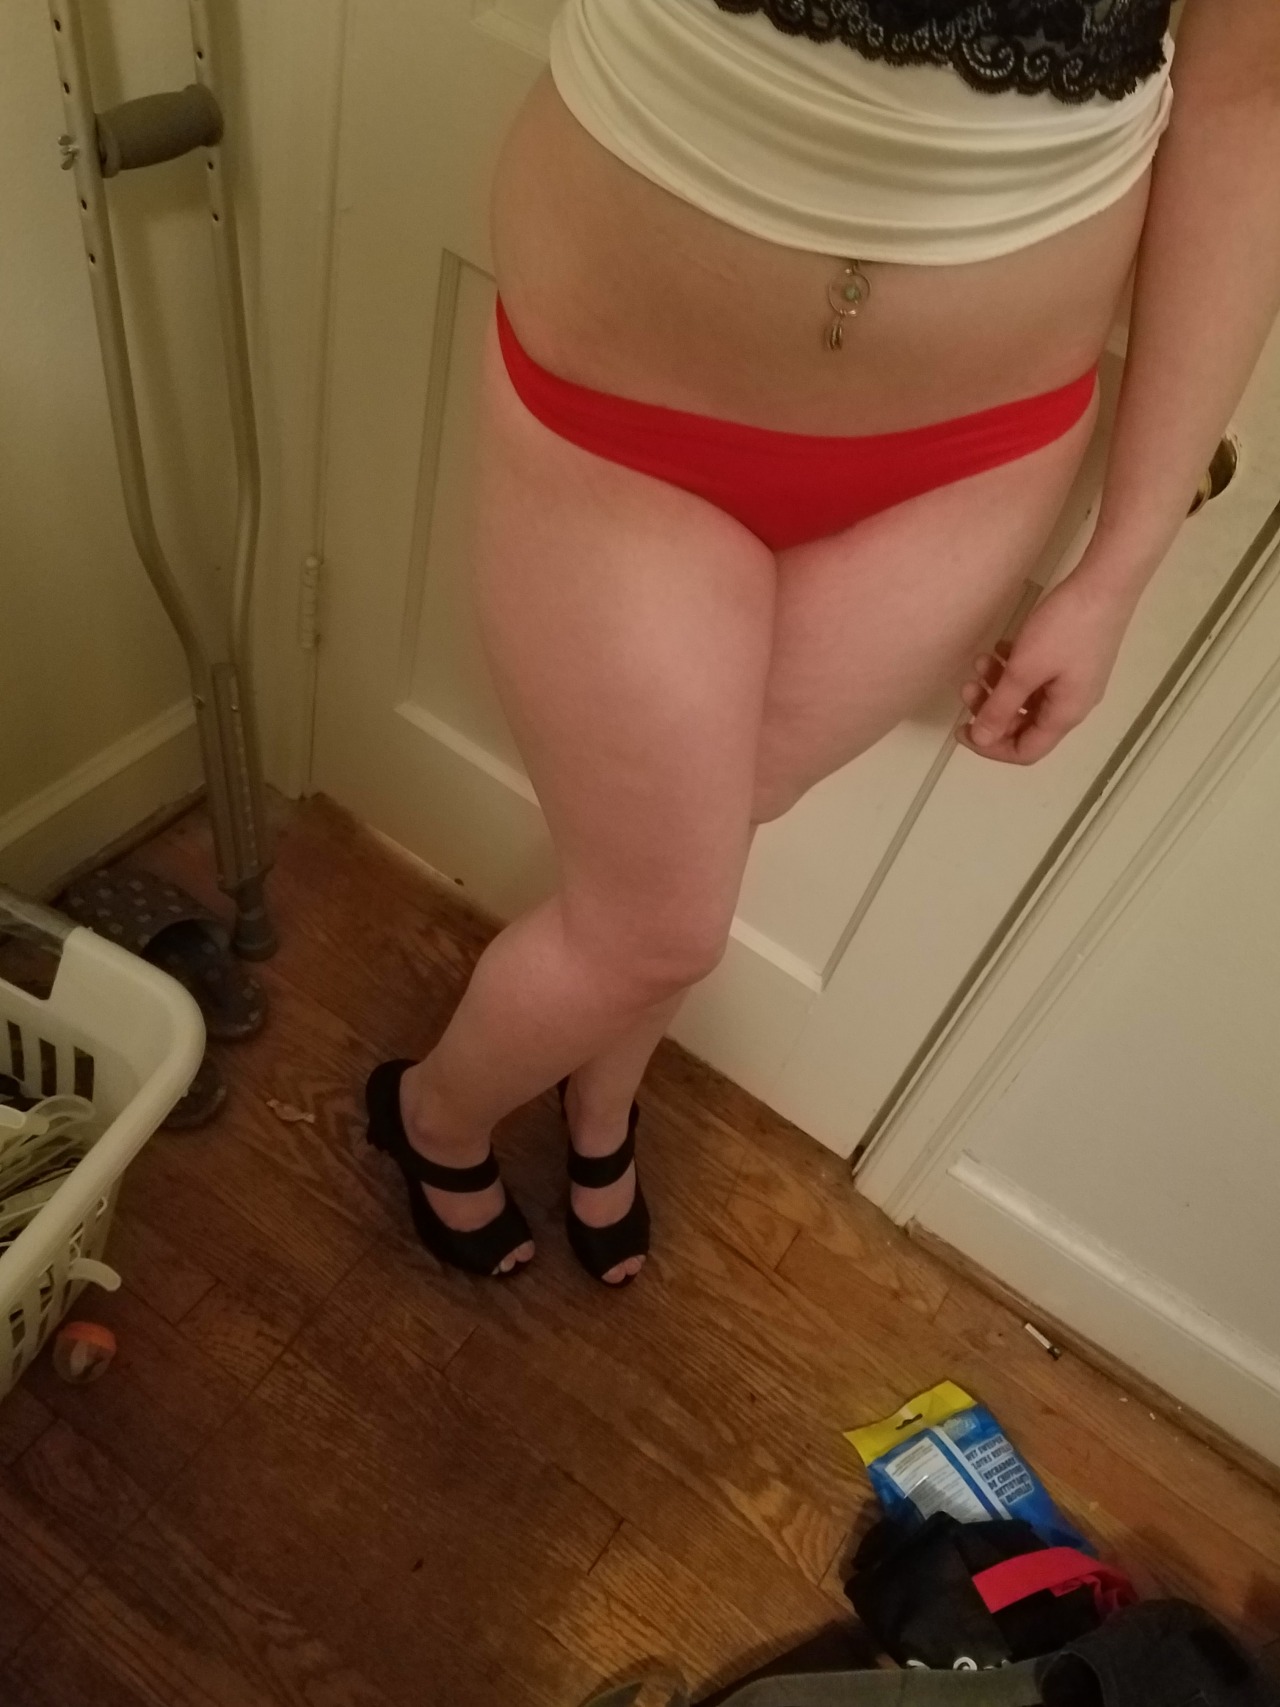 naughty-nikkis-nsfw:I found some cute heels and some sunglasses too. Packing is fun